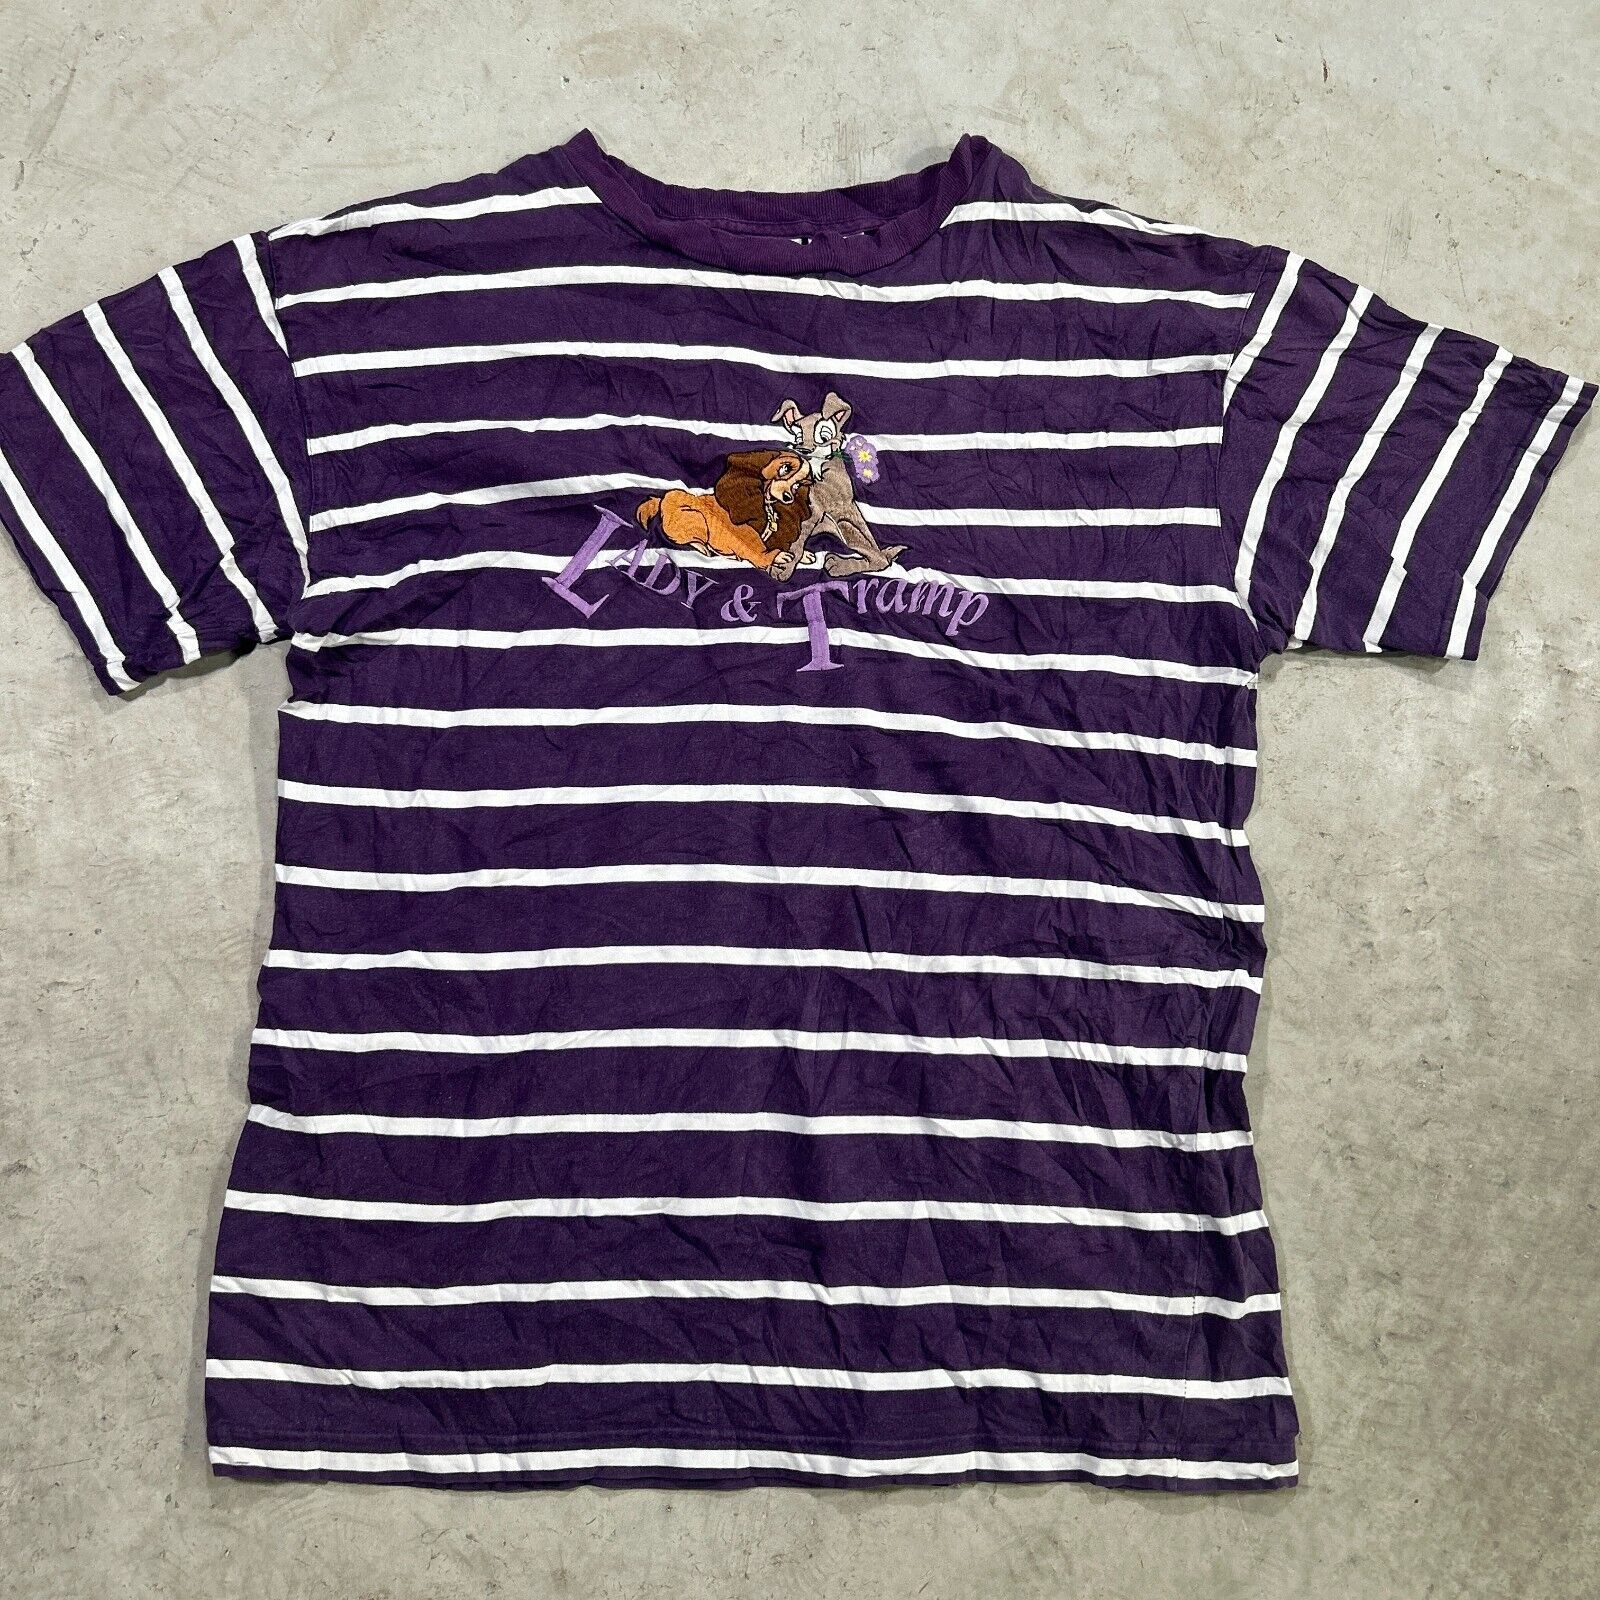 Vintage Disney Store Lady And Tramp Stripes Embroidered T-shirt Sz Large Purple